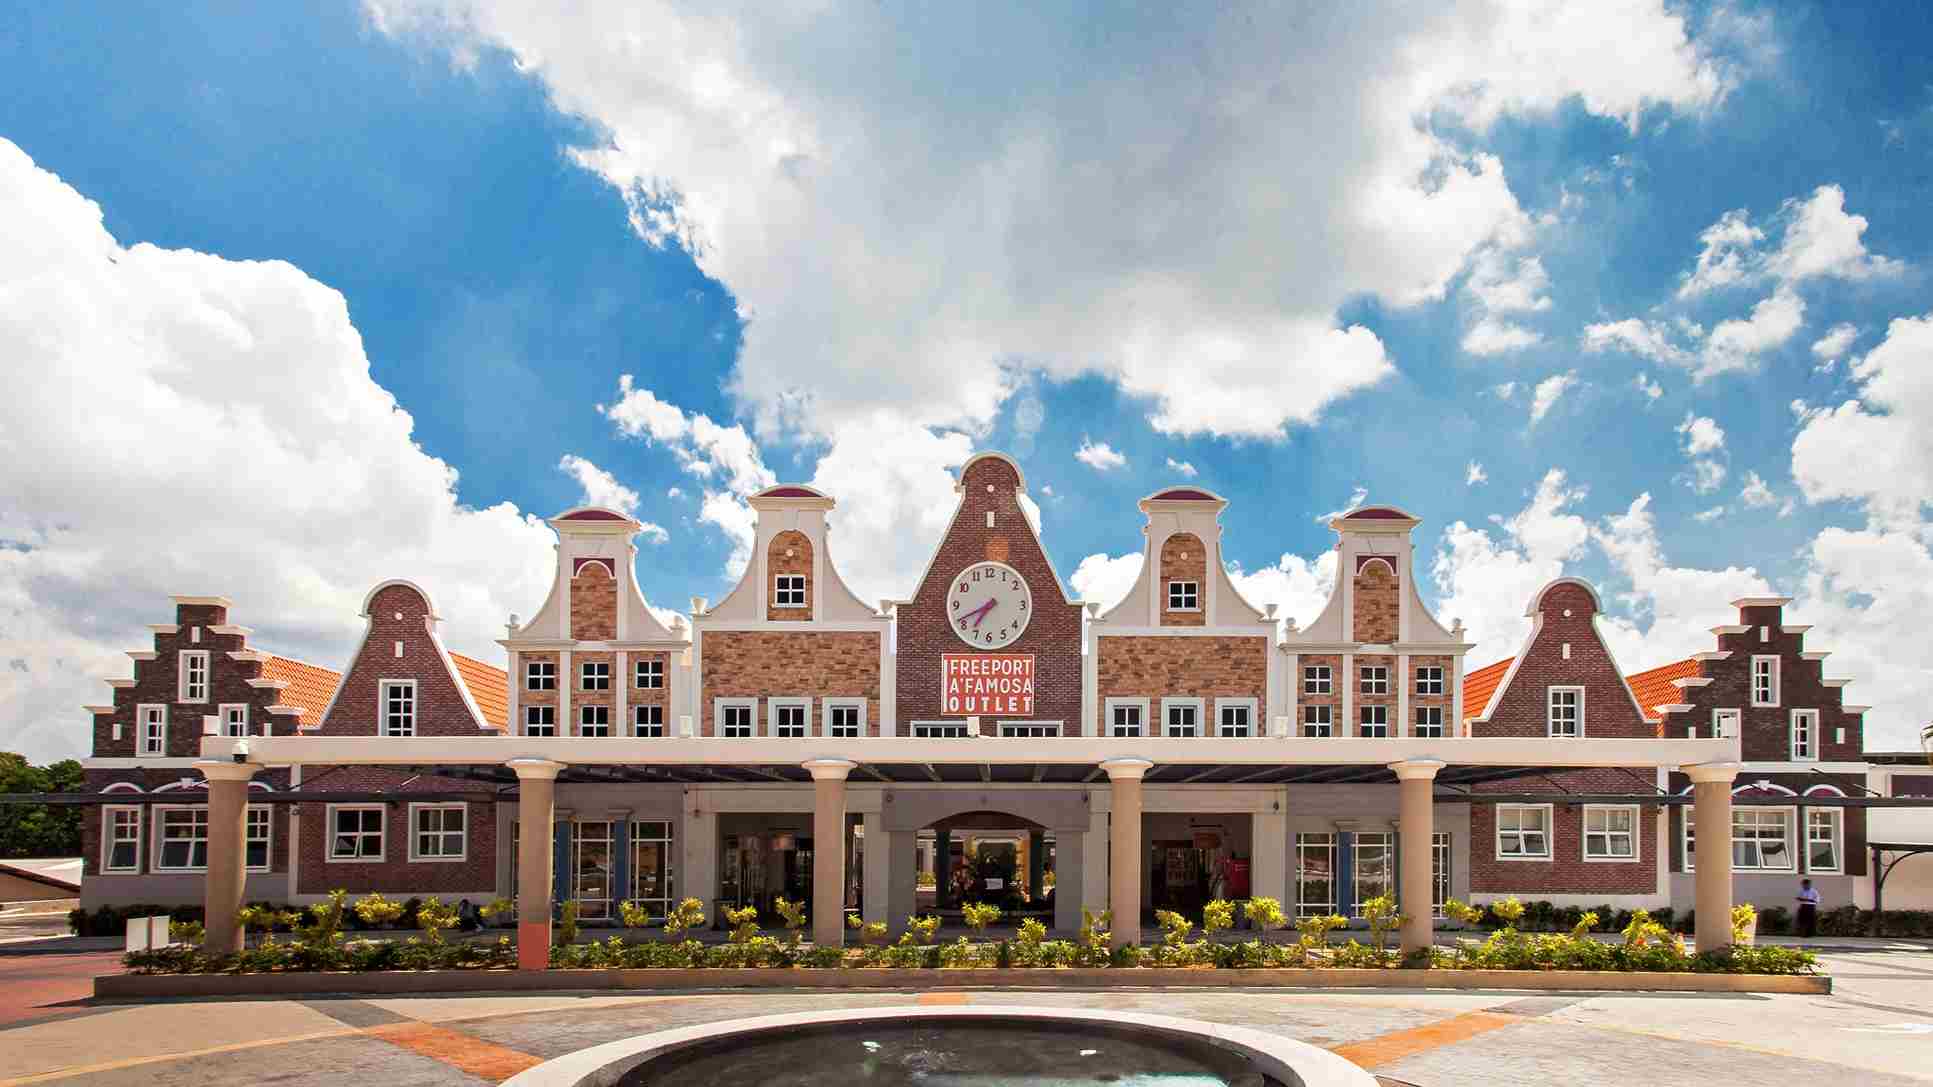 Freeport A’Famosa Outlet location